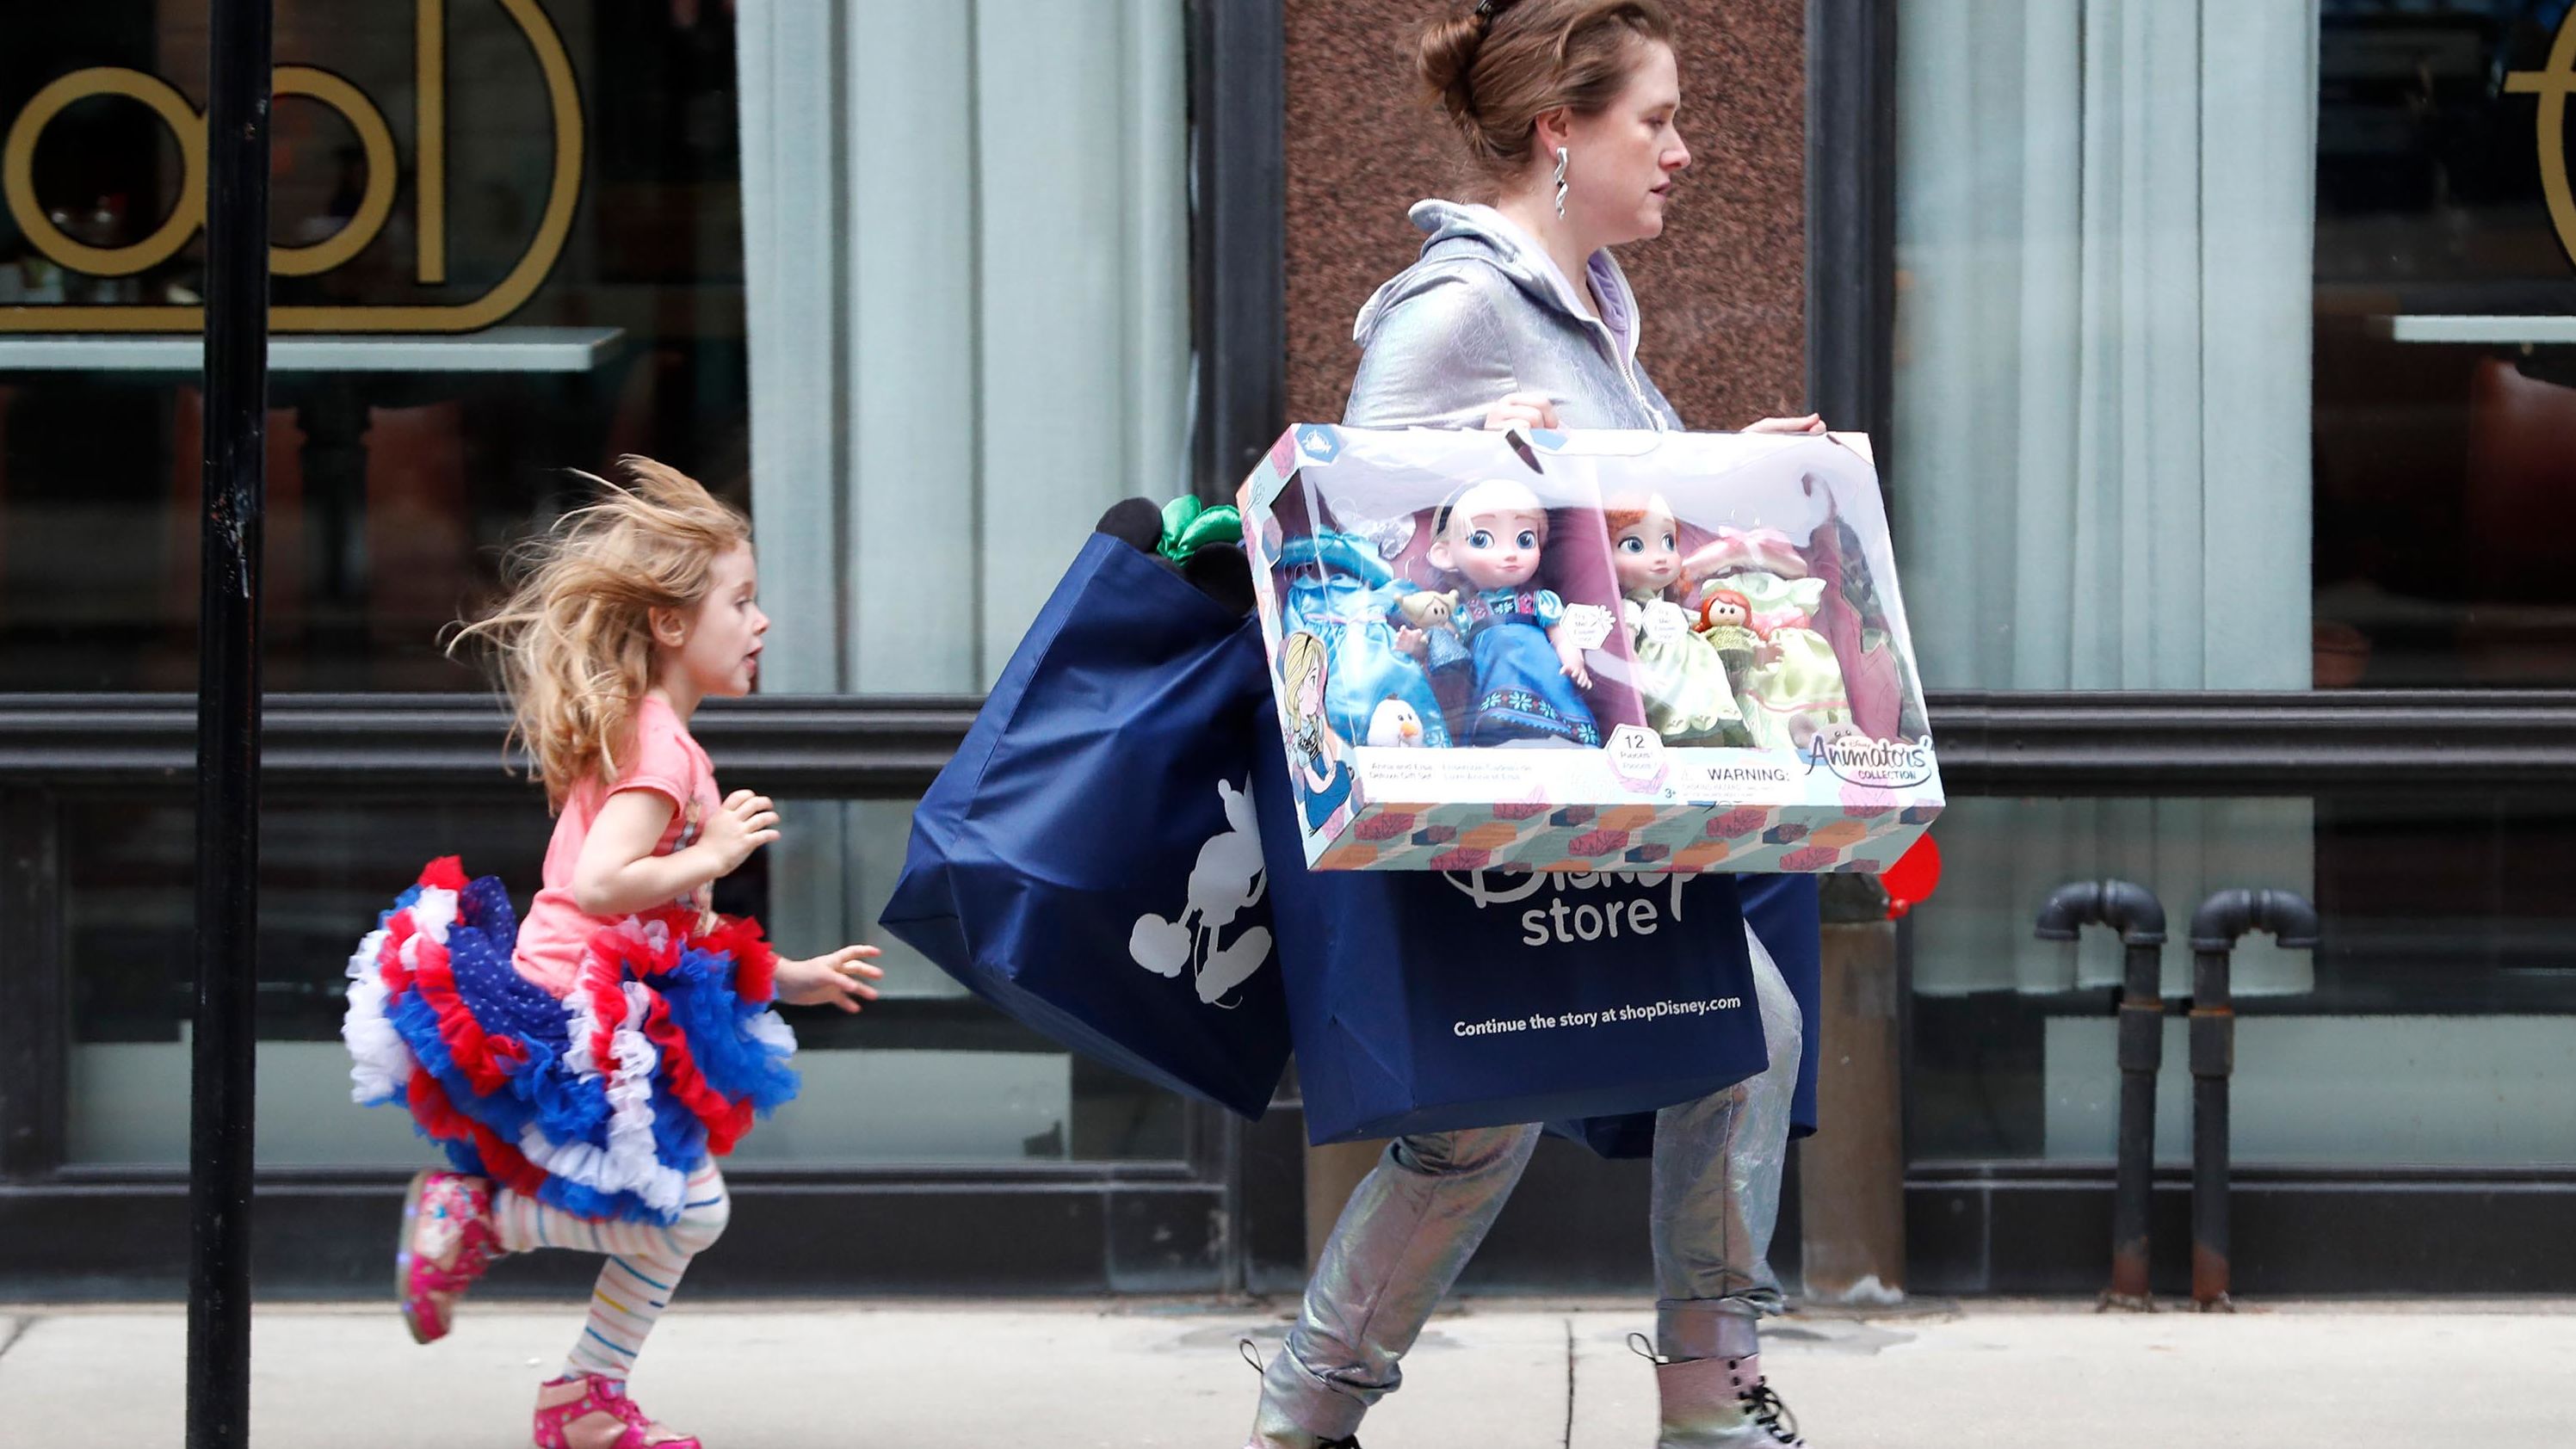 Julia Stamberger and her daughter Xyla hustle back to their car in Chicago.